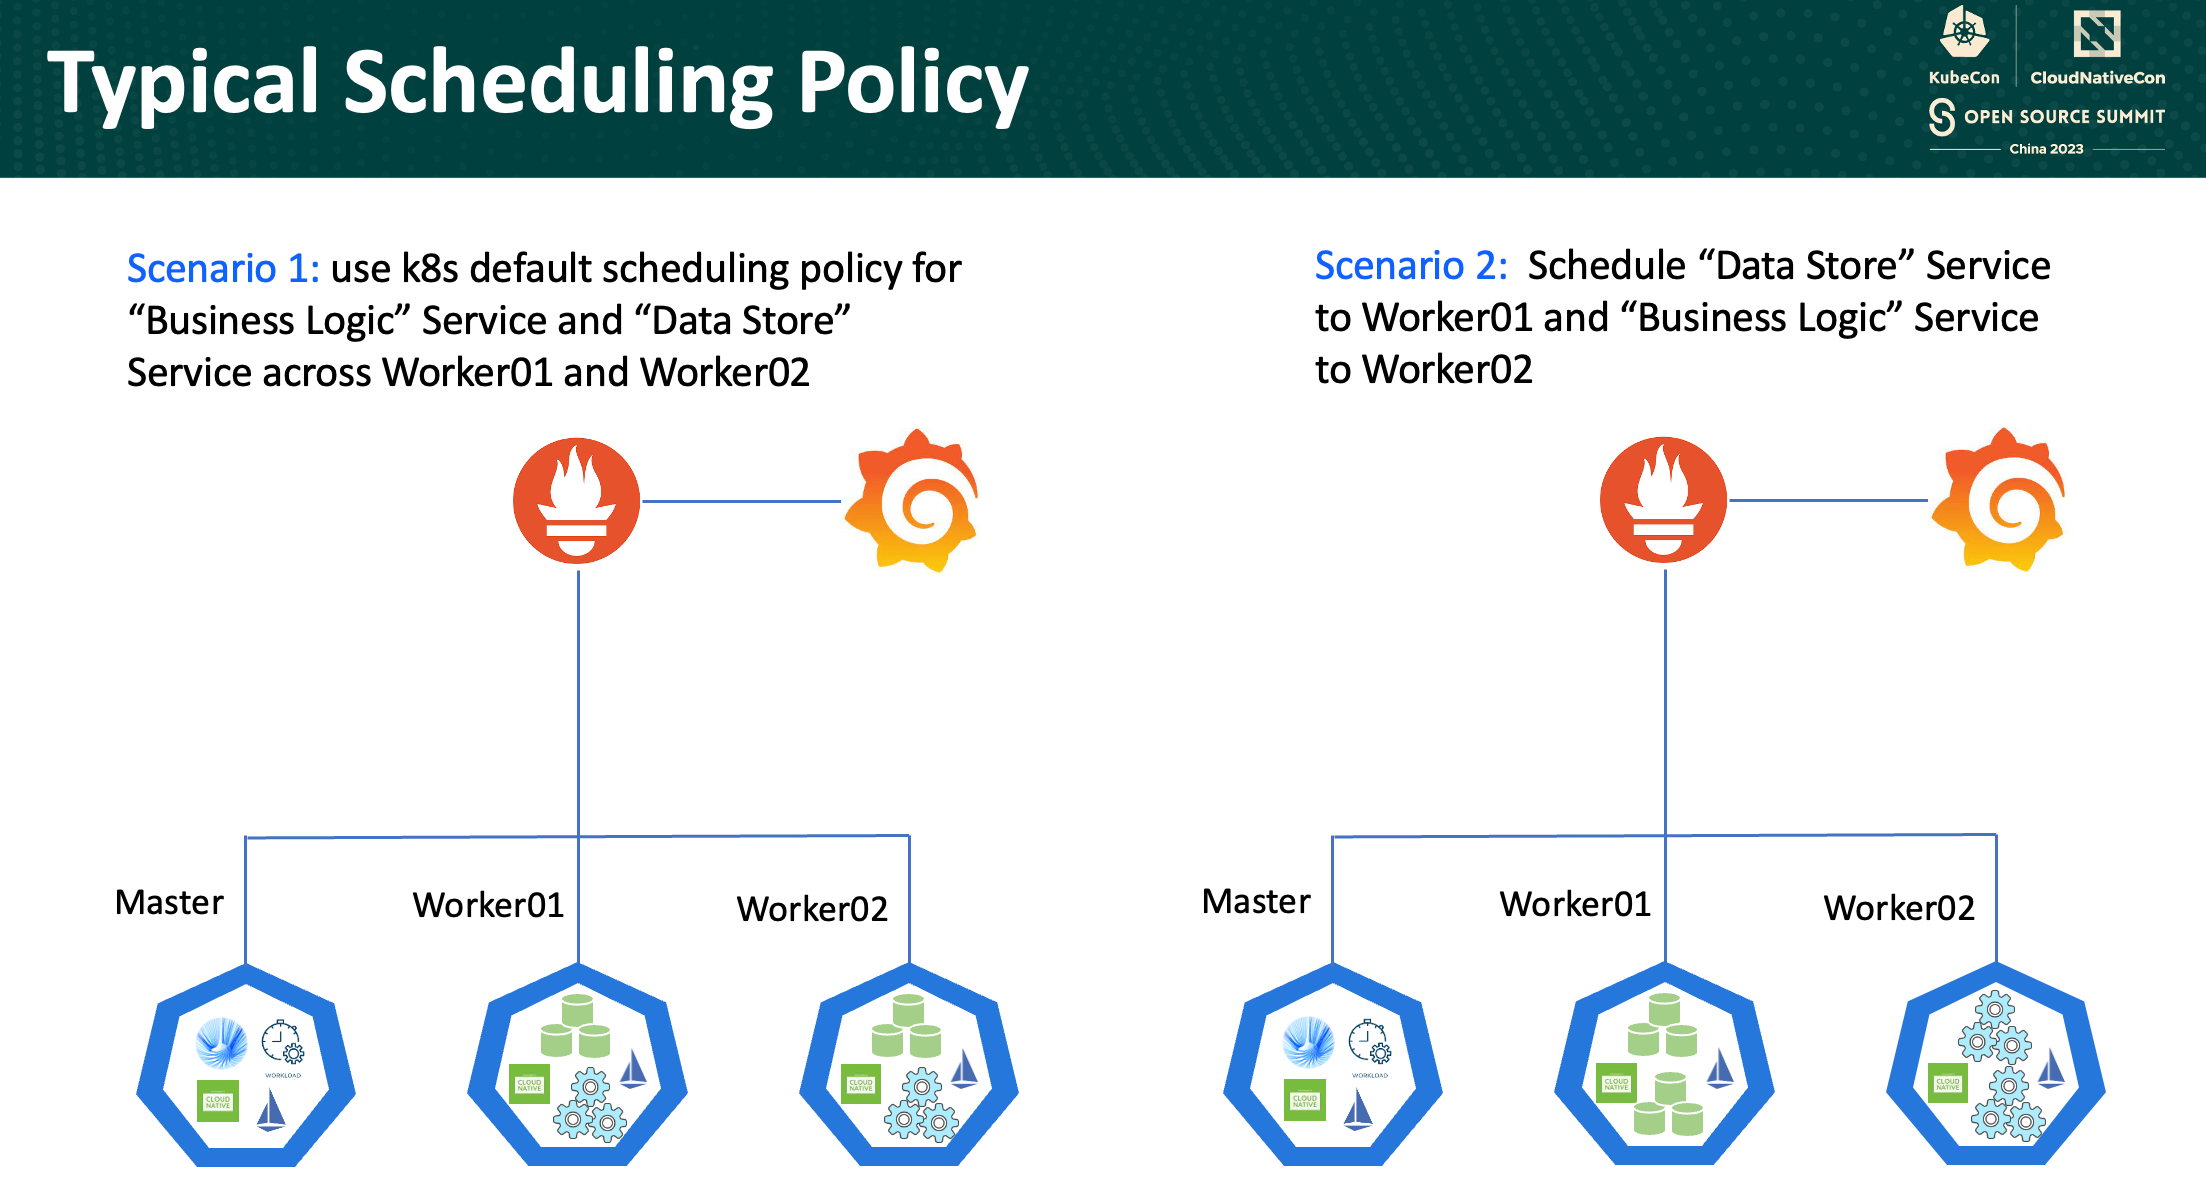 Typical Scheduling Policy